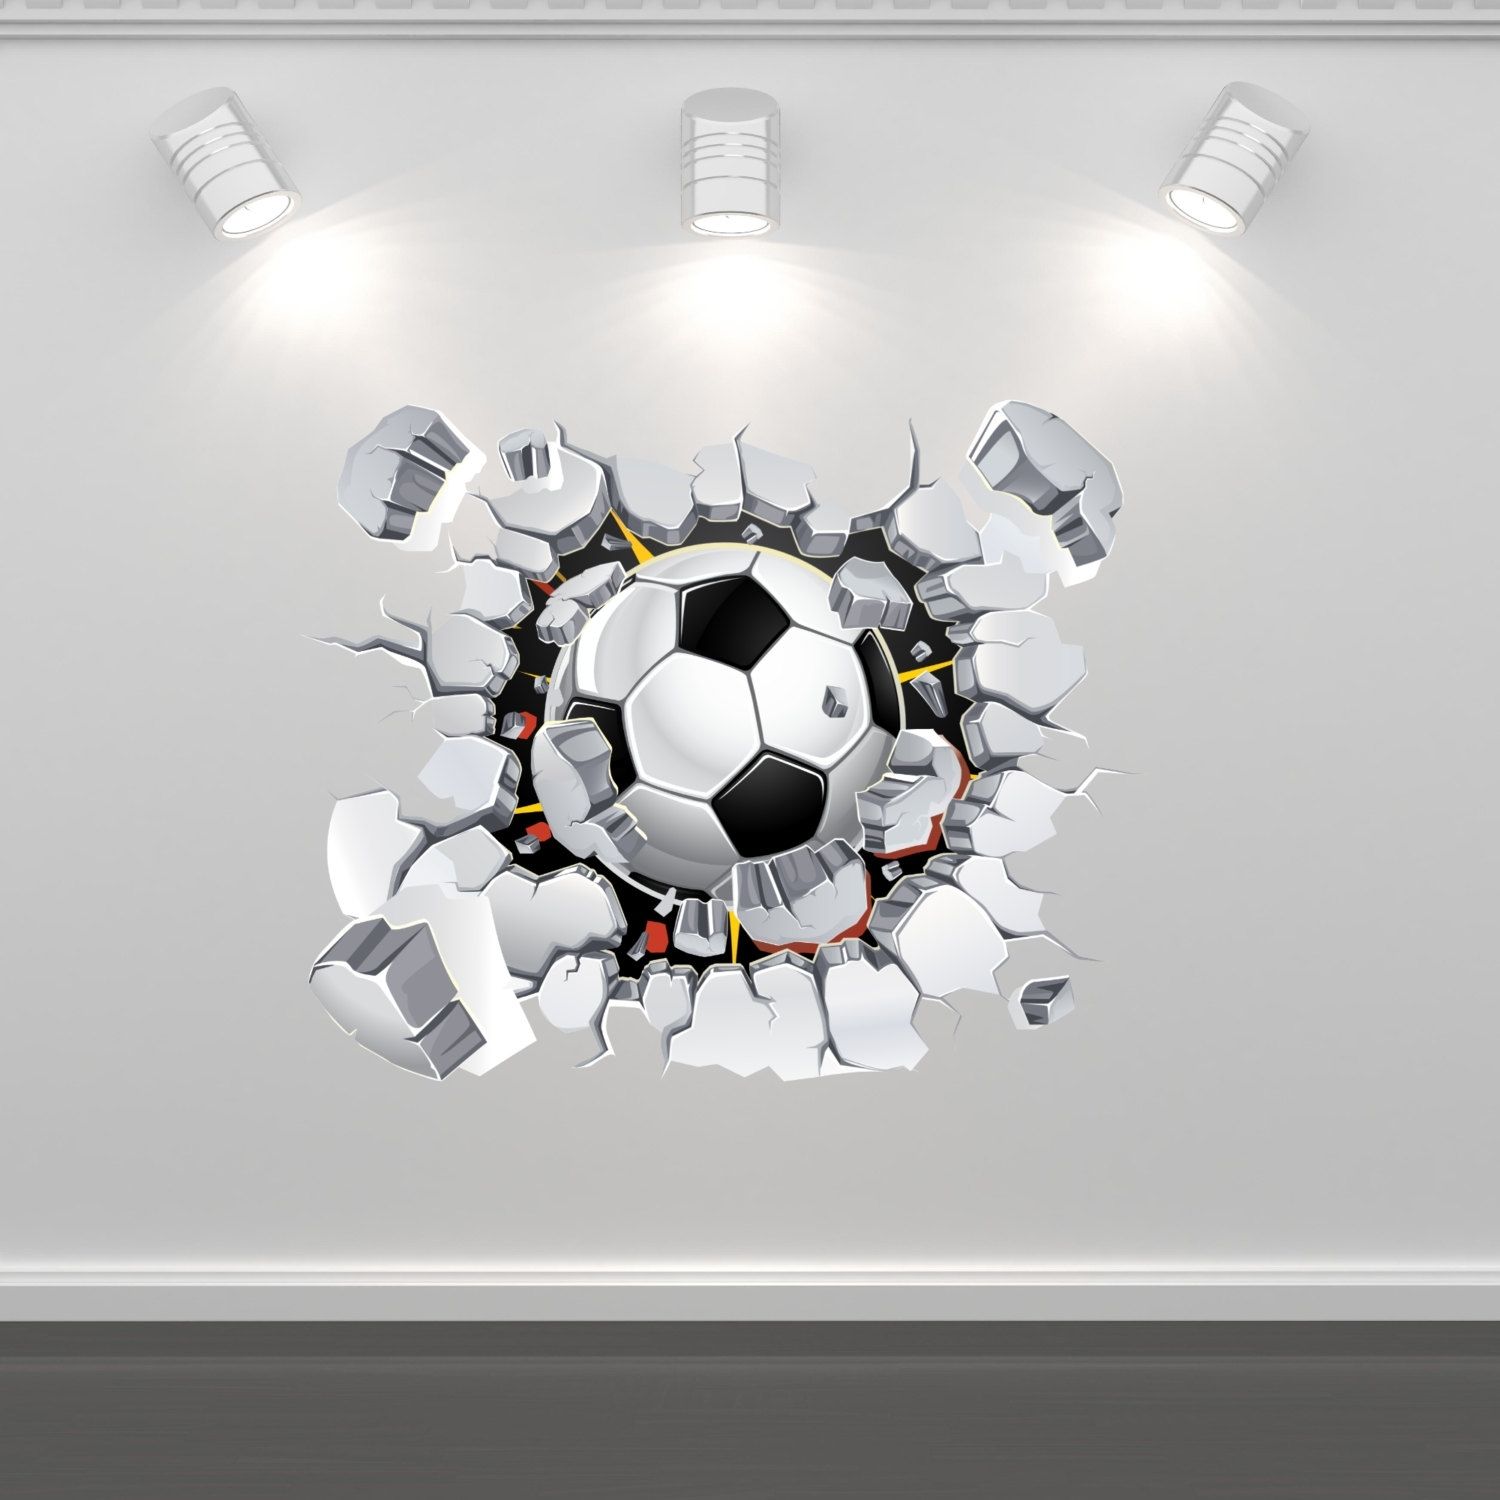 Football Soccer Wall New Soccer Wall Art – Wall Decoration And Wall With Soccer Wall Art (View 4 of 20)